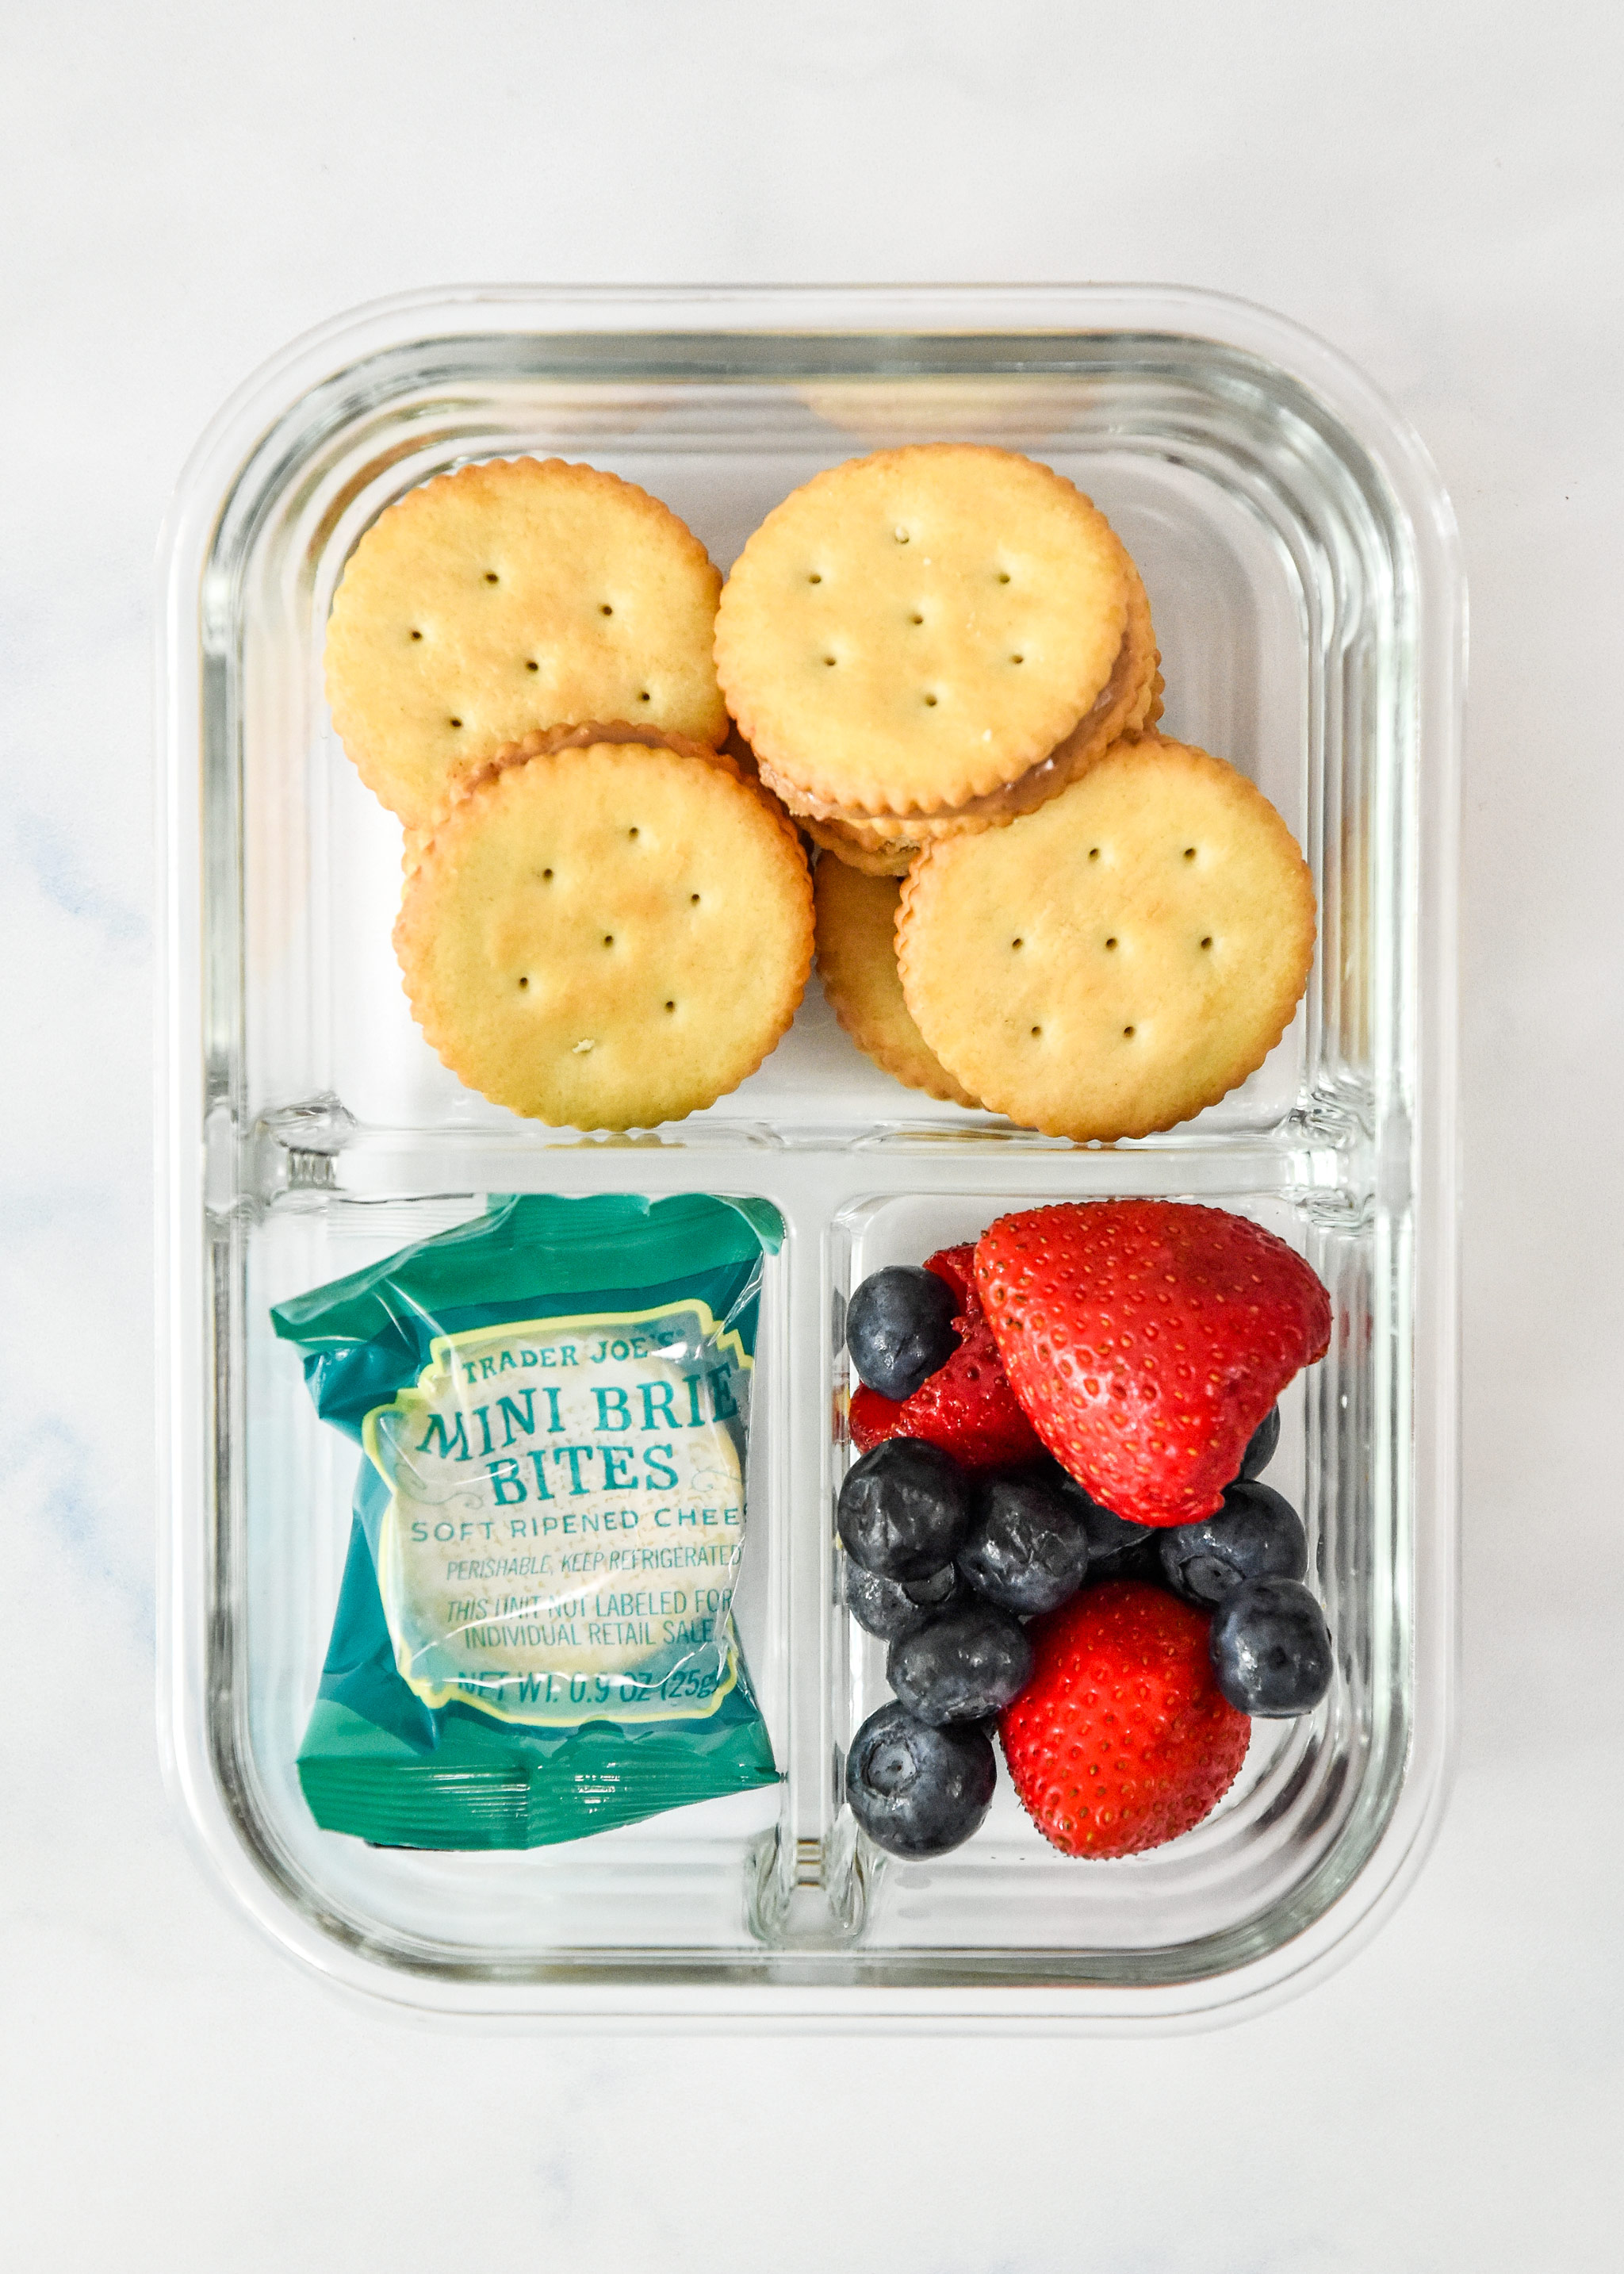 peanut butter cracker sandwiches snack box idea in a meal prep container.